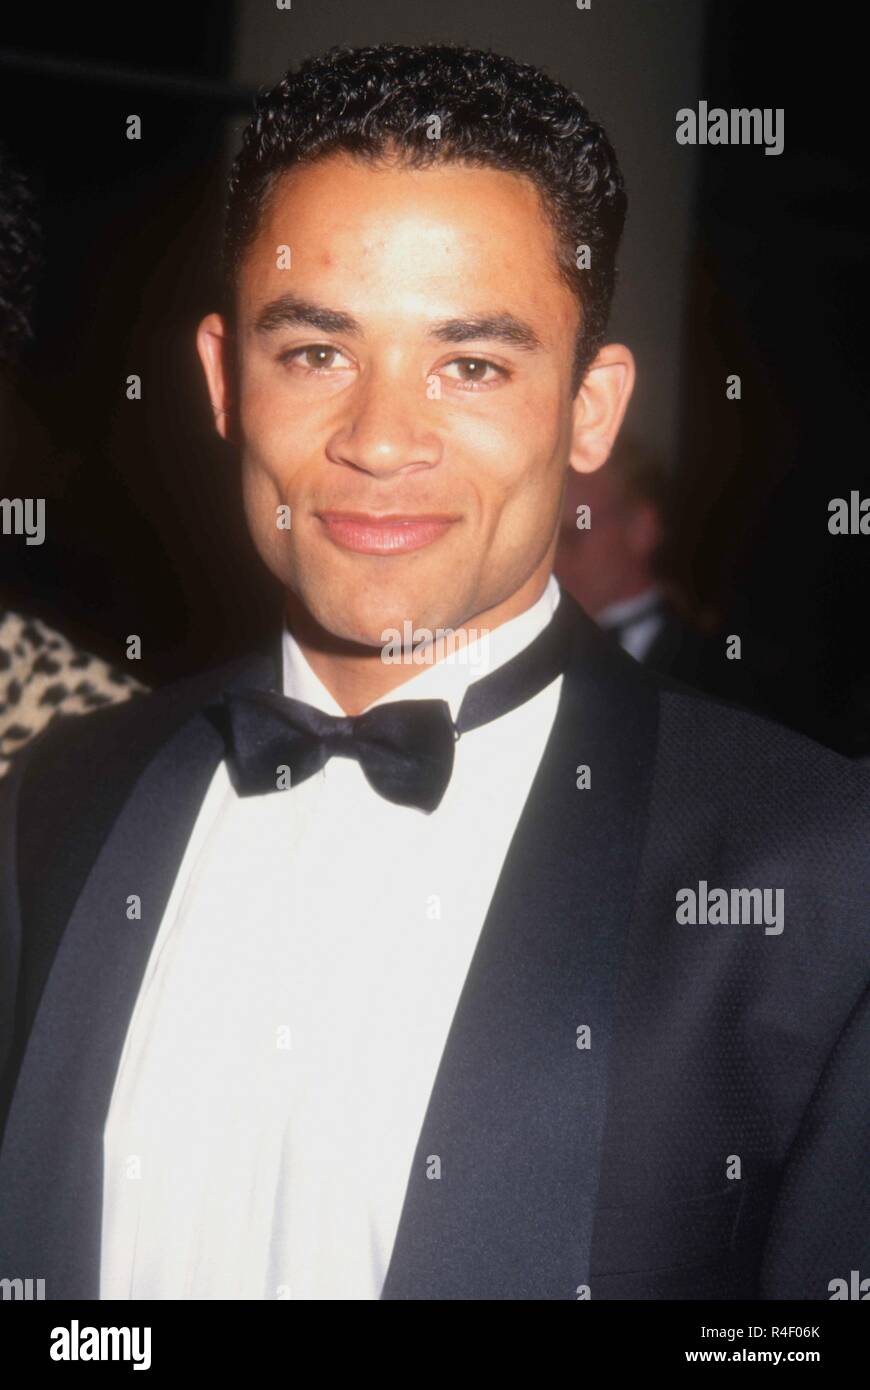 BEVERLY HILLS, CA - FEBRUARY 26: Actor Thyme Lewis attends the Ninth Annual Soap Opera Digest Awards on February 26, 1993 at the Beverly Hilton Hotel in Beverly Hills, California. Photo by Barry King/Alamy Stock Photo Stock Photo